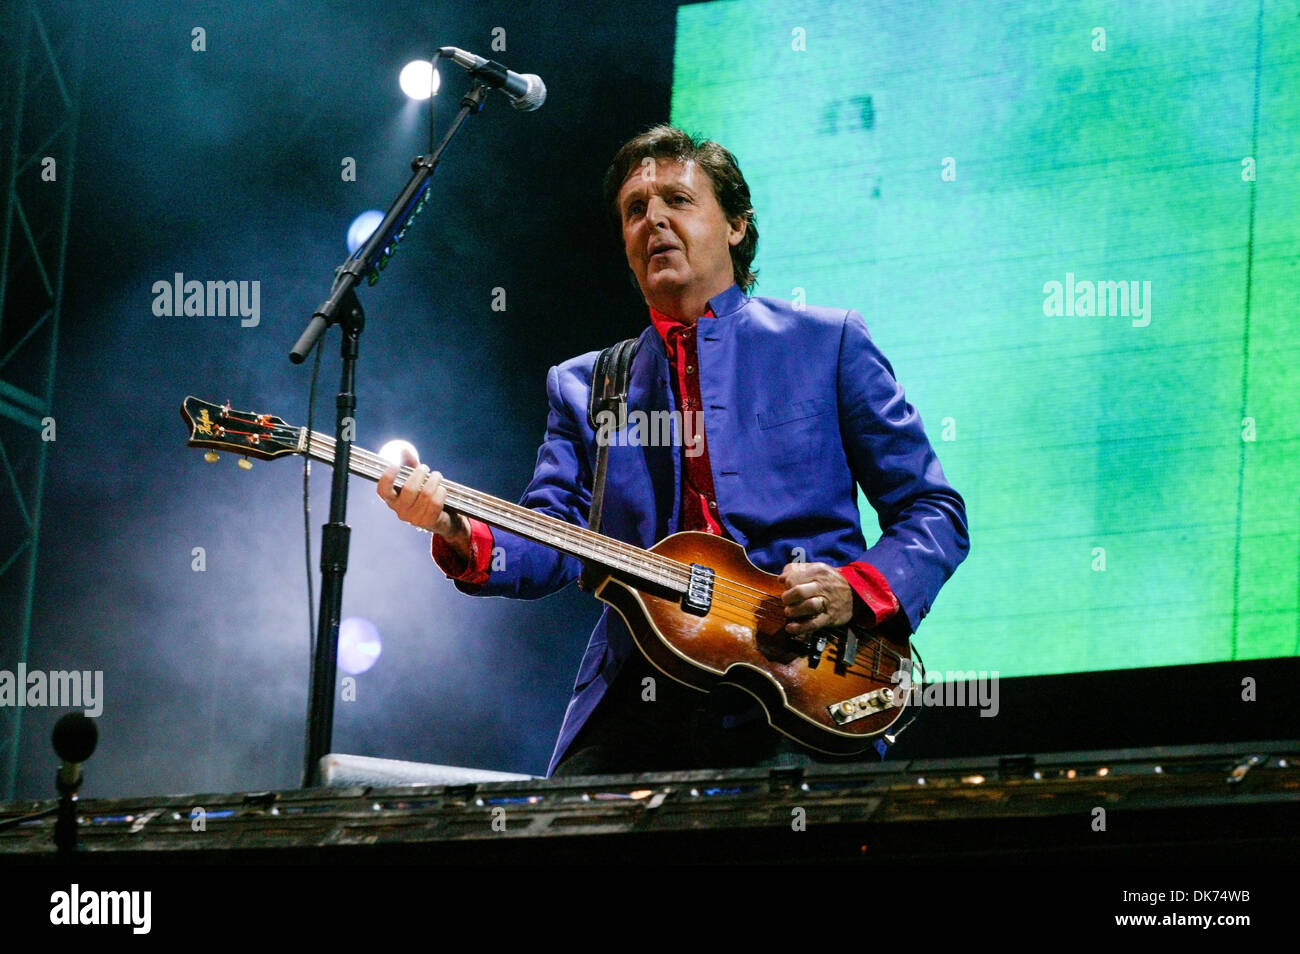 Sir Paul McCartney performing on the Pyramid stage at the Glastonbury Festival 2004. Stock Photo